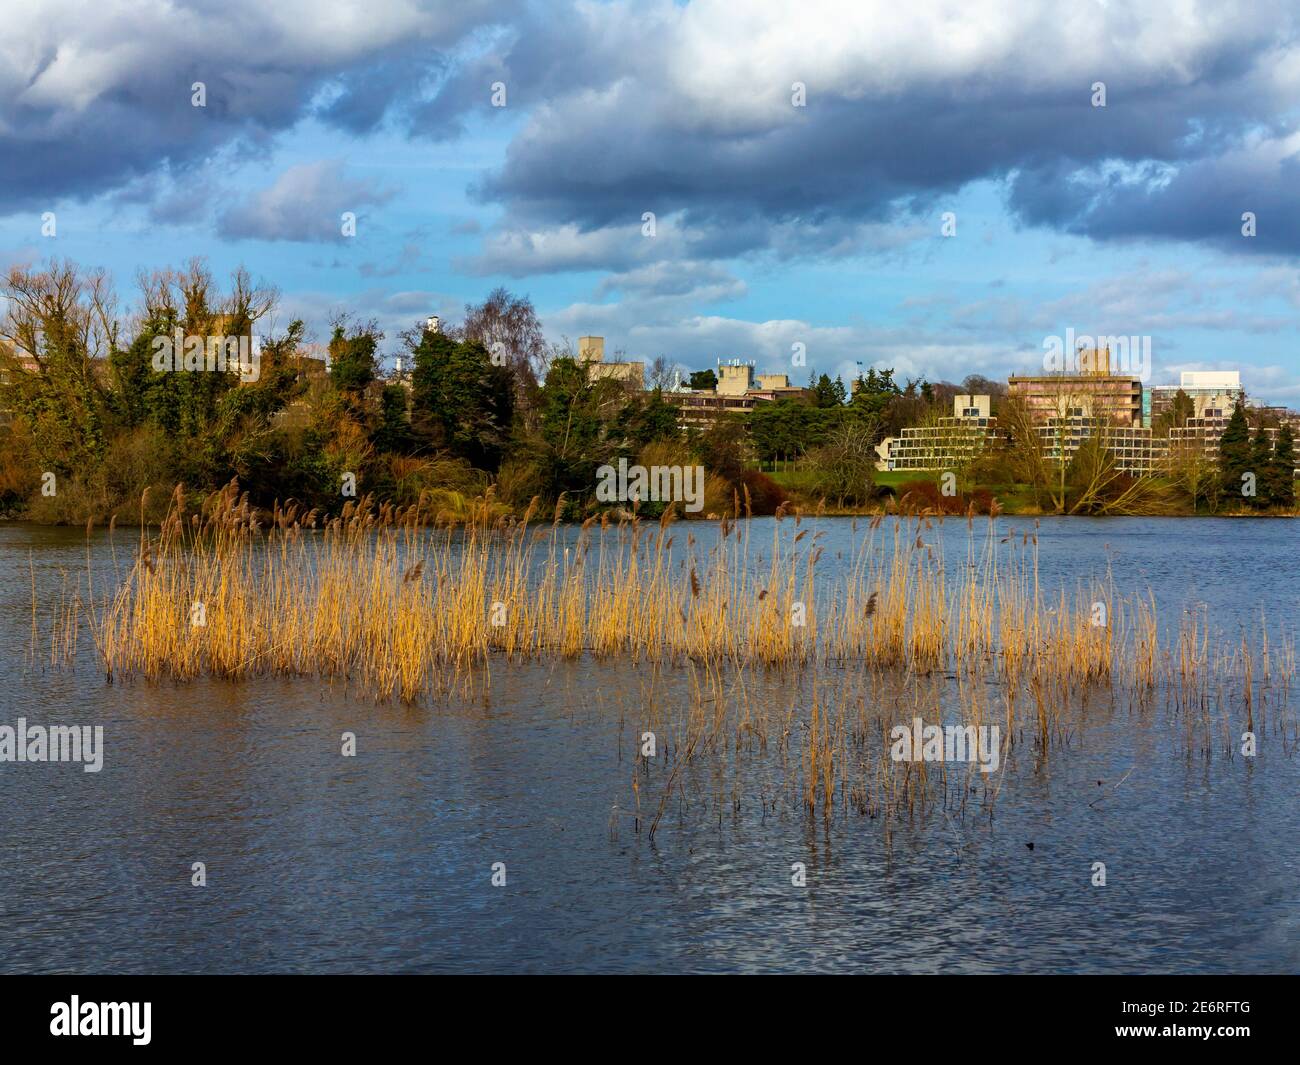 The University of East Anglia campus in Norwich England UK designed by Denys Lasdun and built from 1962 to 1968 with lake and reeds in foreground. Stock Photo